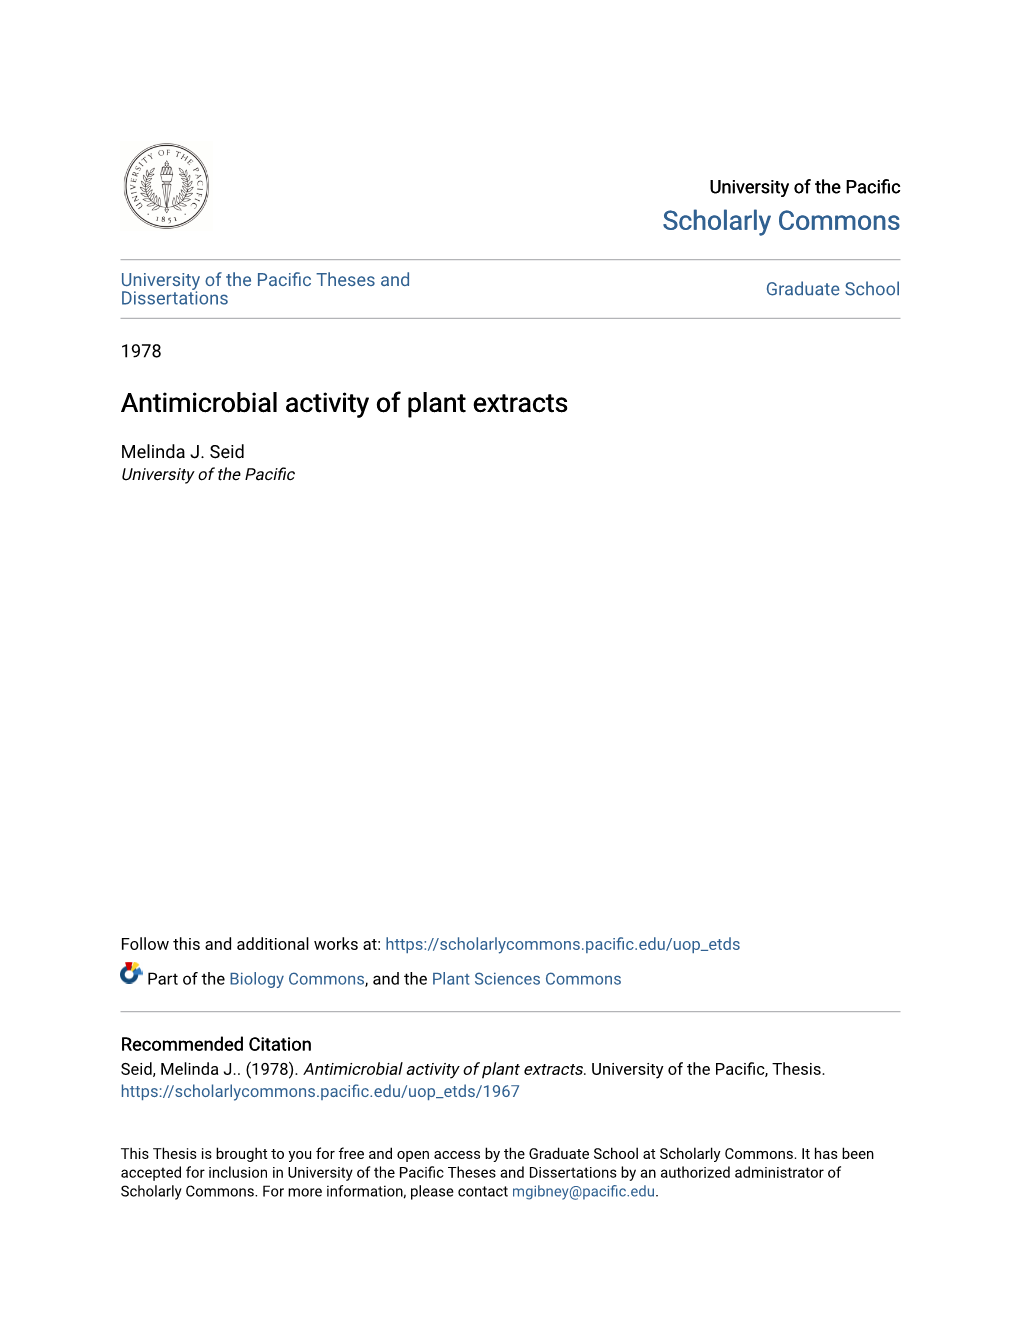 Antimicrobial Activity of Plant Extracts